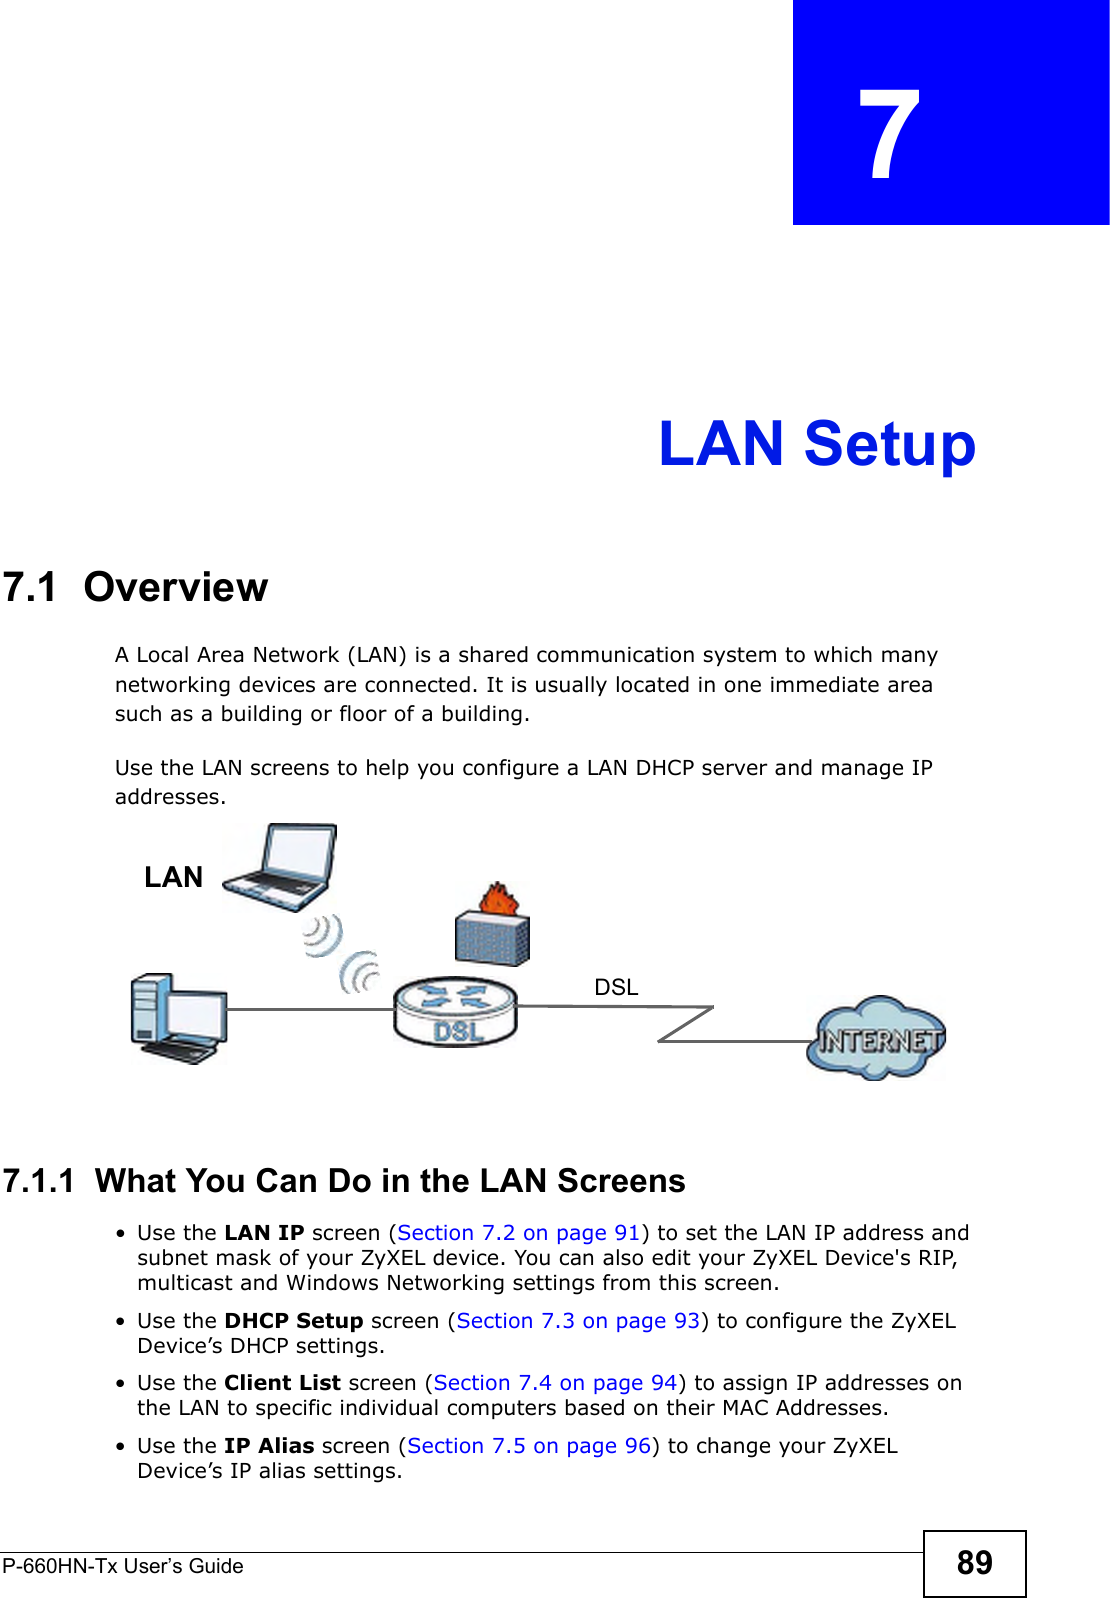 P-660HN-Tx User’s Guide 89CHAPTER  7 LAN Setup7.1  OverviewA Local Area Network (LAN) is a shared communication system to which many networking devices are connected. It is usually located in one immediate area such as a building or floor of a building.Use the LAN screens to help you configure a LAN DHCP server and manage IP addresses.7.1.1  What You Can Do in the LAN Screens•Use the LAN IP screen (Section 7.2 on page 91) to set the LAN IP address and subnet mask of your ZyXEL device. You can also edit your ZyXEL Device&apos;s RIP, multicast and Windows Networking settings from this screen.•Use the DHCP Setup screen (Section 7.3 on page 93) to configure the ZyXEL Device’s DHCP settings.•Use the Client List screen (Section 7.4 on page 94) to assign IP addresses on the LAN to specific individual computers based on their MAC Addresses. •Use the IP Alias screen (Section 7.5 on page 96) to change your ZyXEL Device’s IP alias settings.DSLLAN